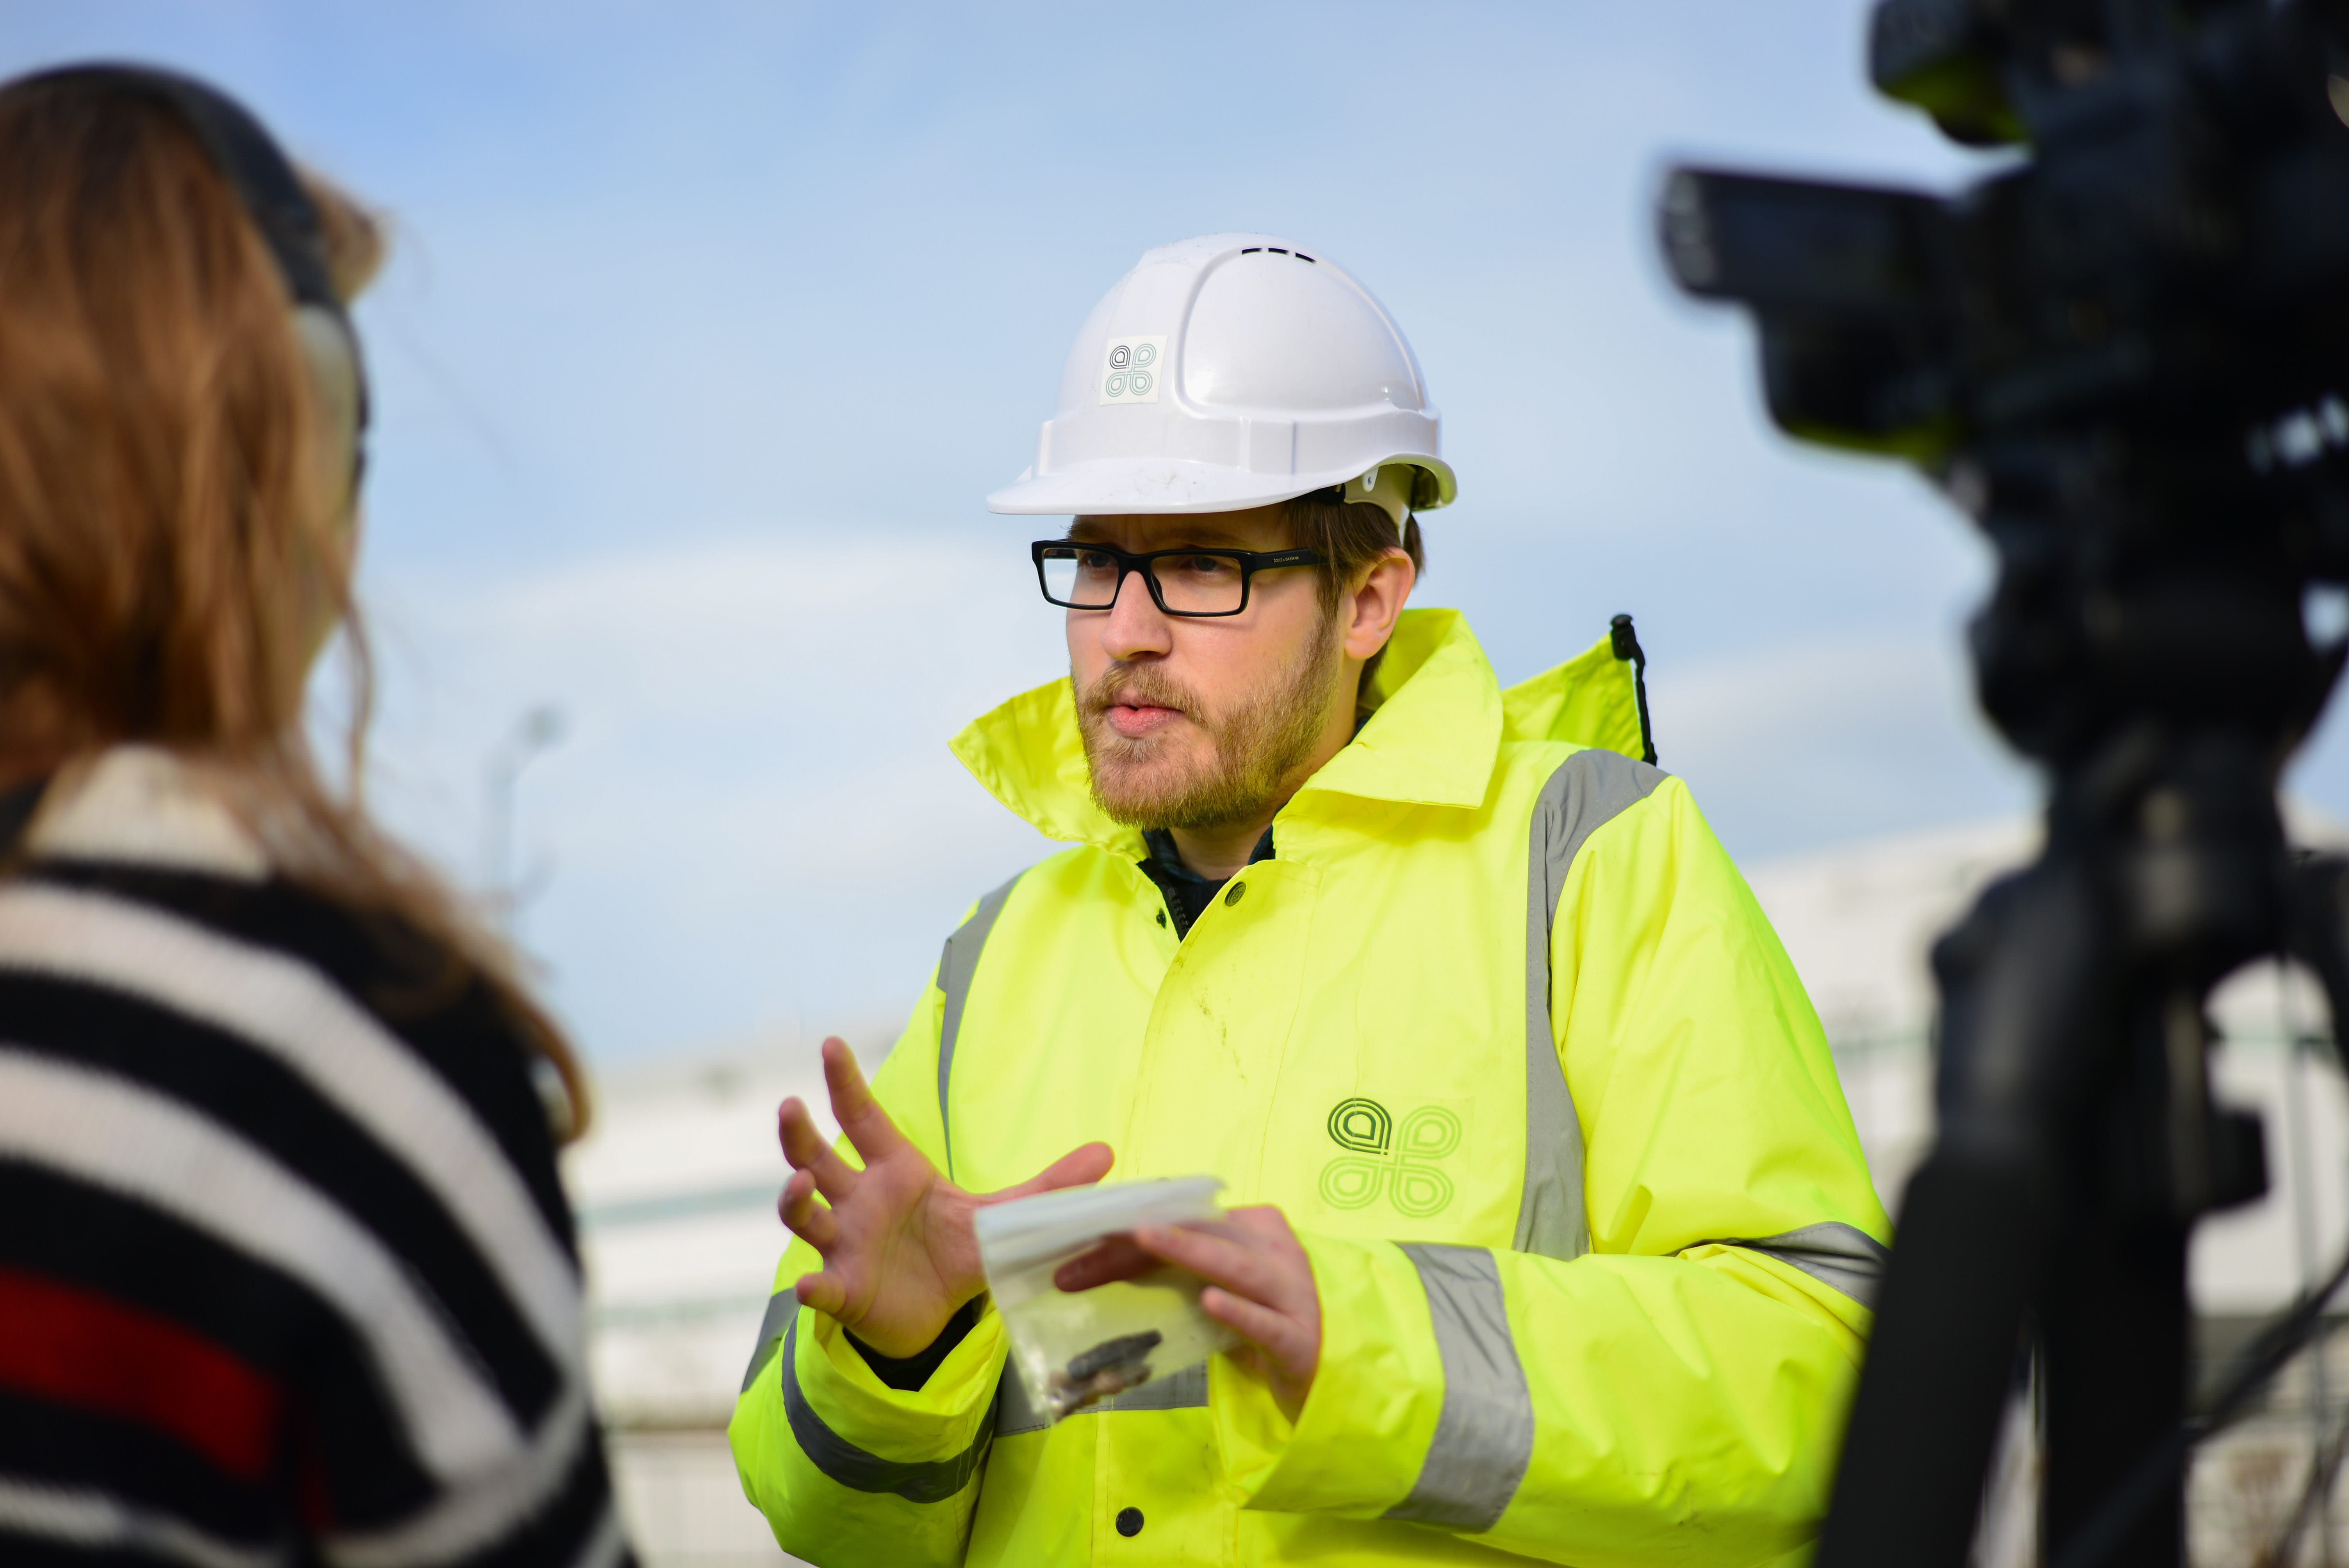 Image of a person in a hard hat and reflective coat